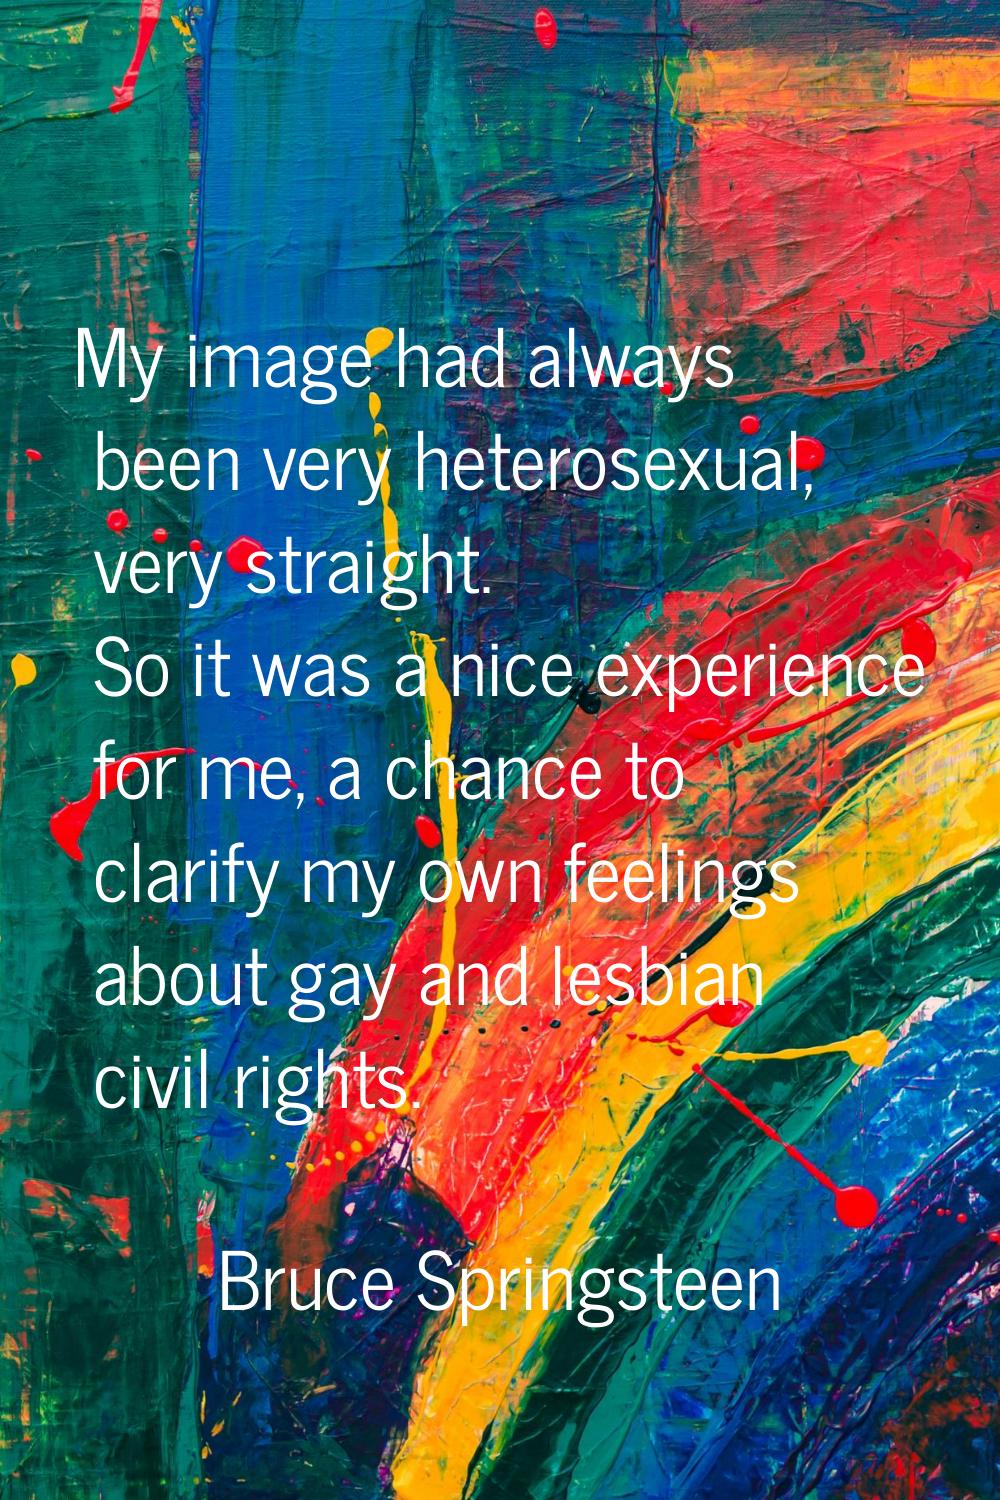 My image had always been very heterosexual, very straight. So it was a nice experience for me, a ch